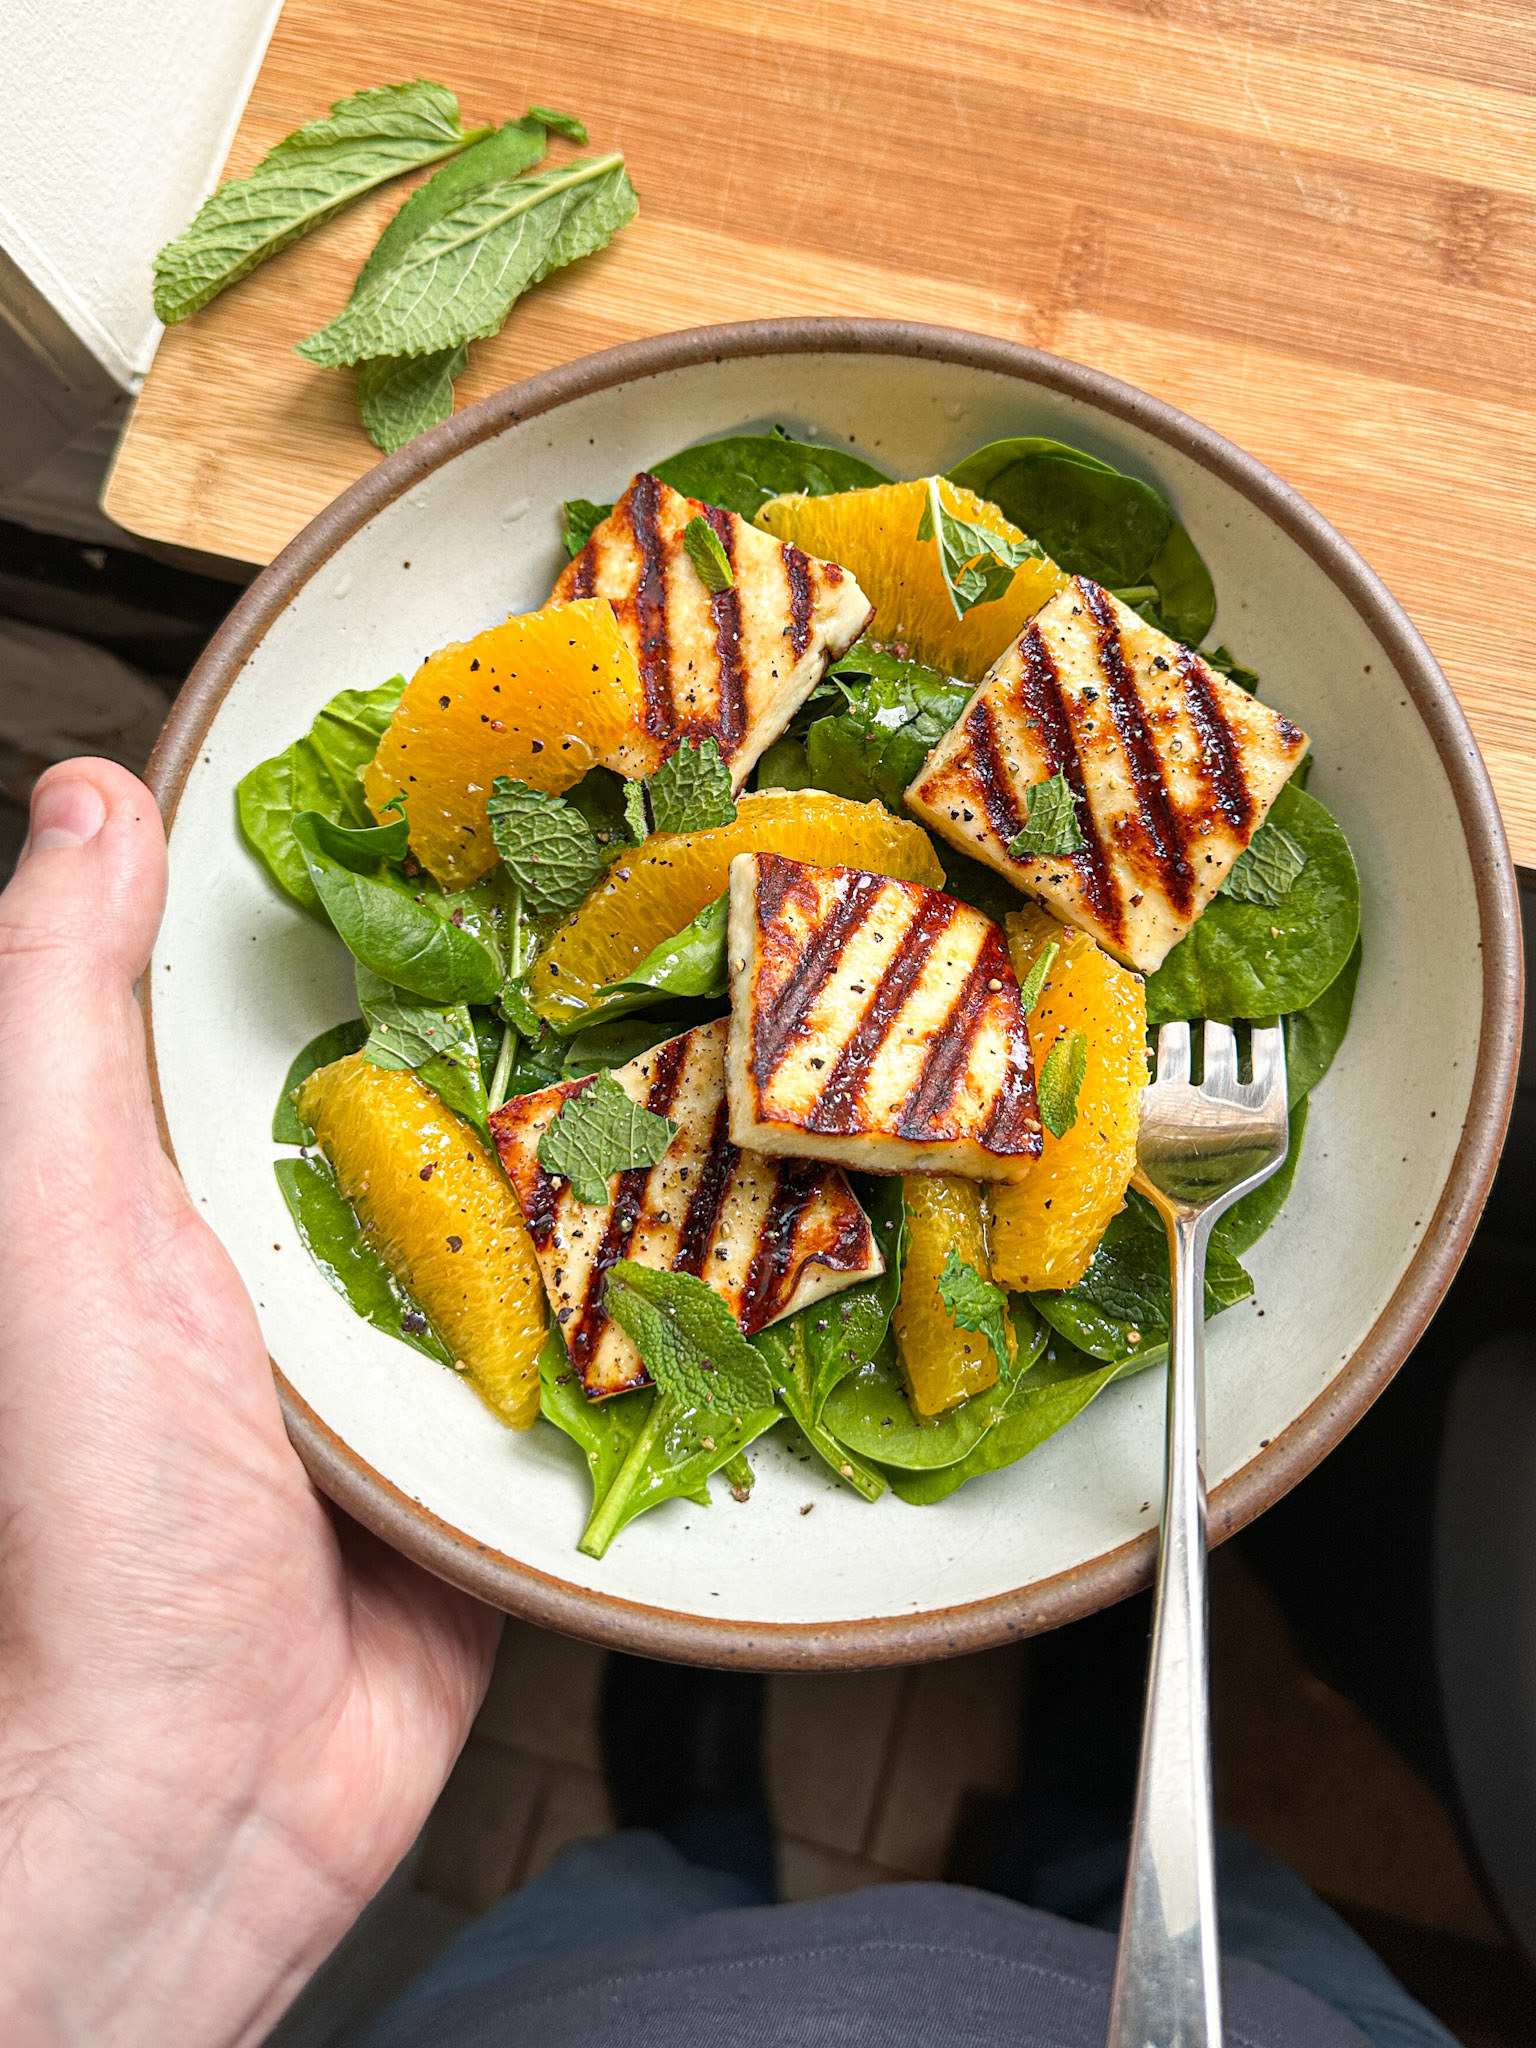 bowl of baby spinach salad topped with the pan fried cheese with diagonal grill marks, and orange segments